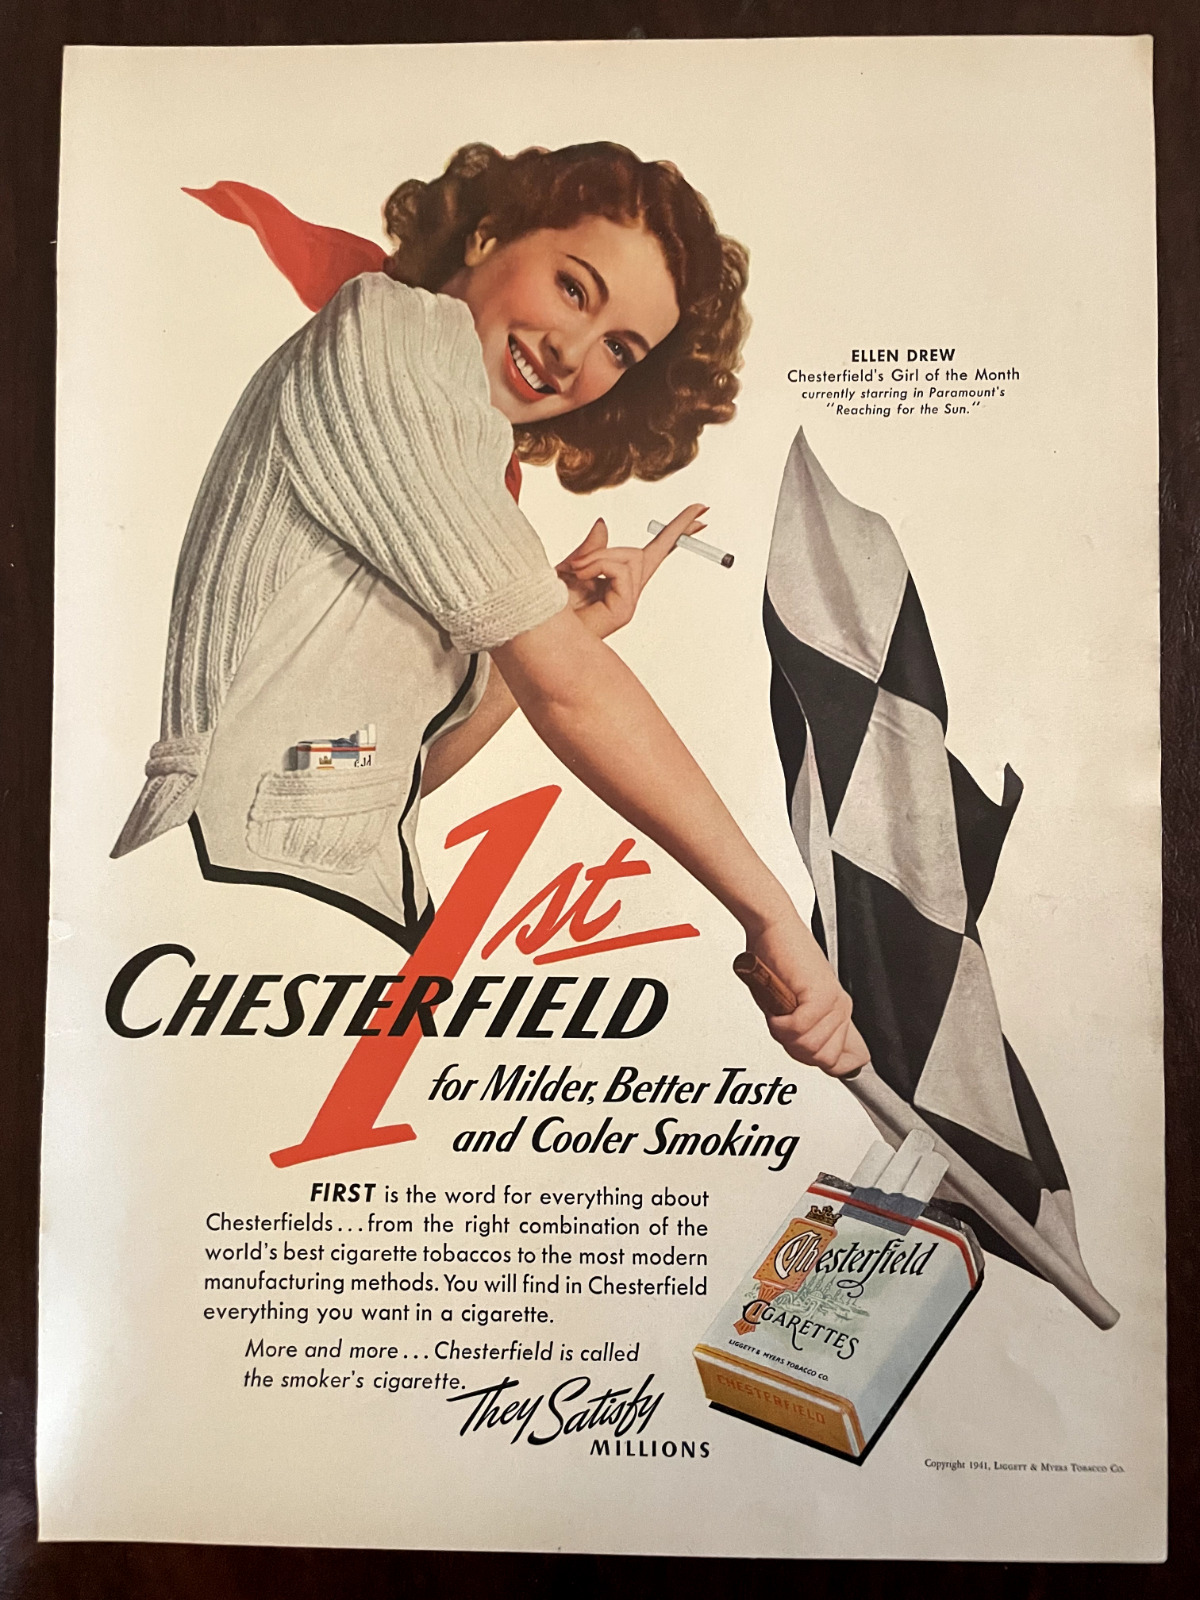 1941 CHESTERFIELD Cigarettes Vintage Print Ad Girl of the Month Ellen Drew